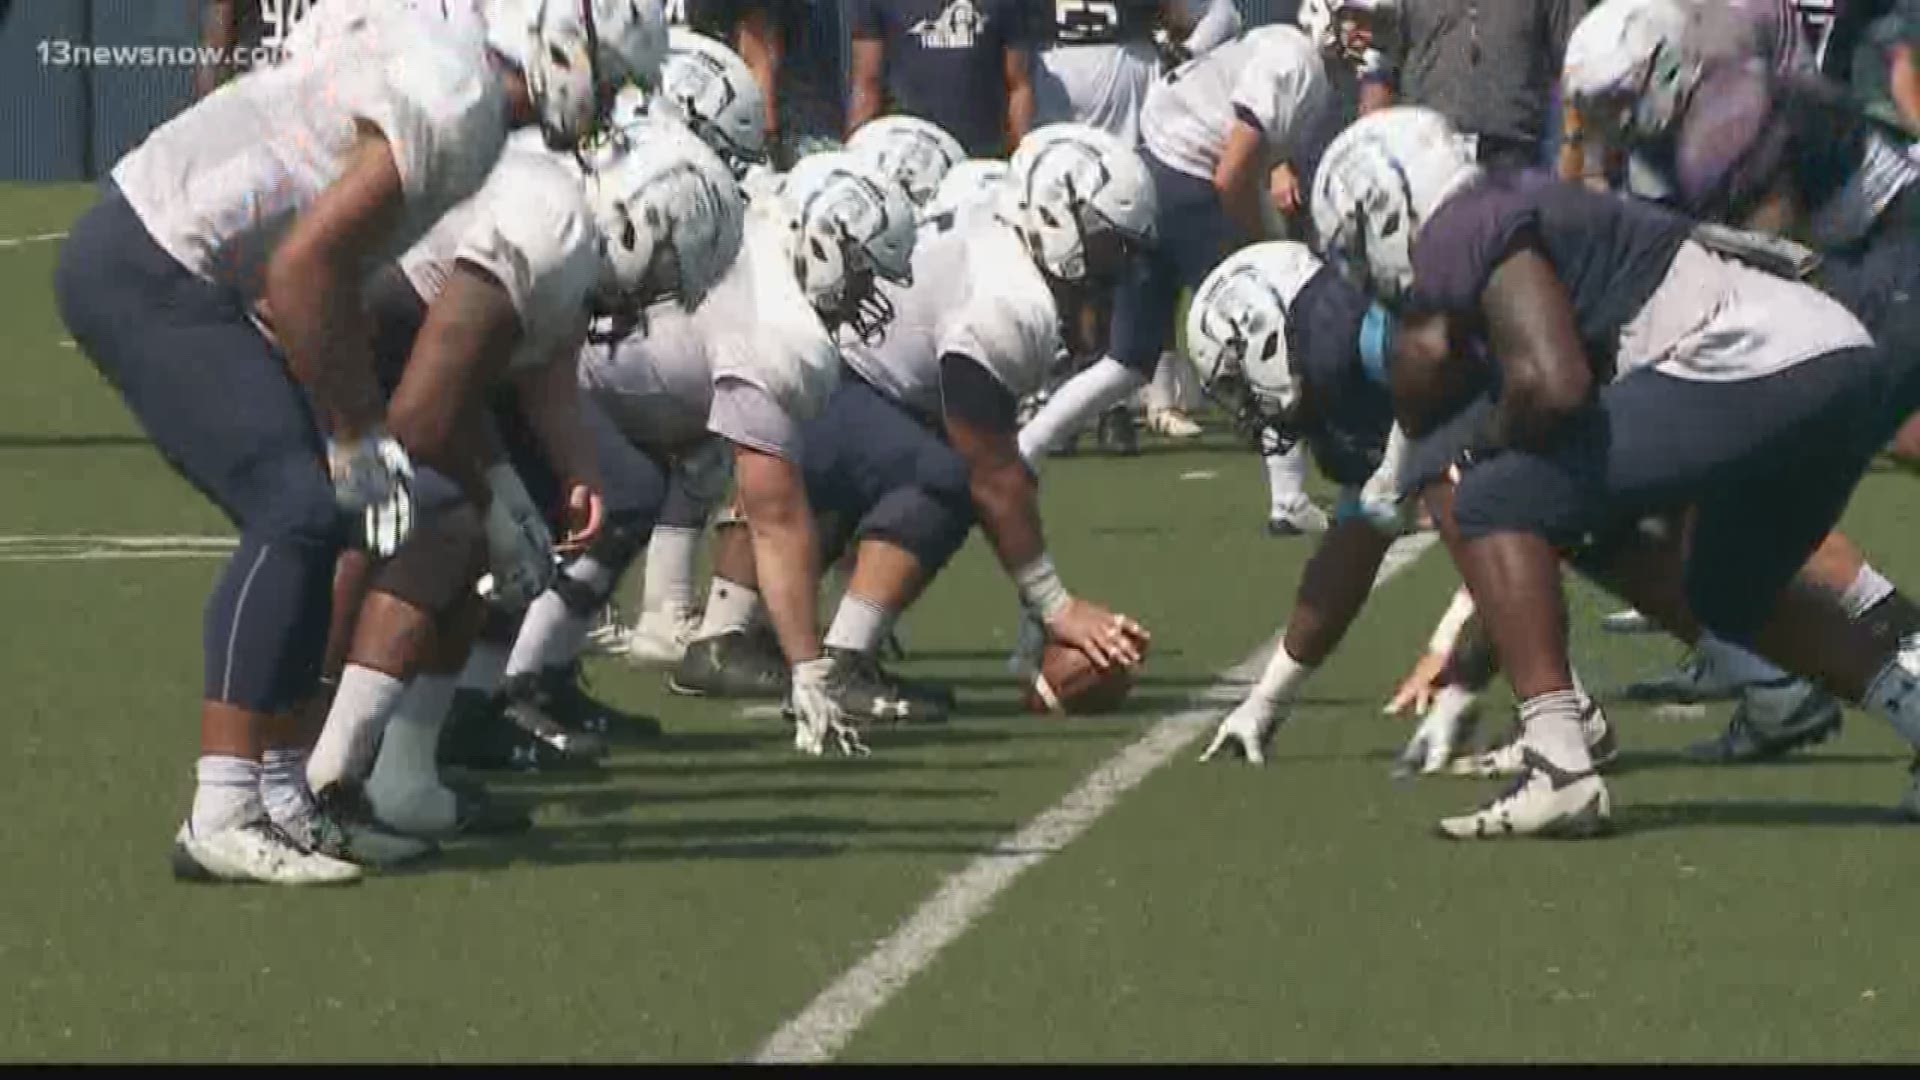 Previewing the ODU football season